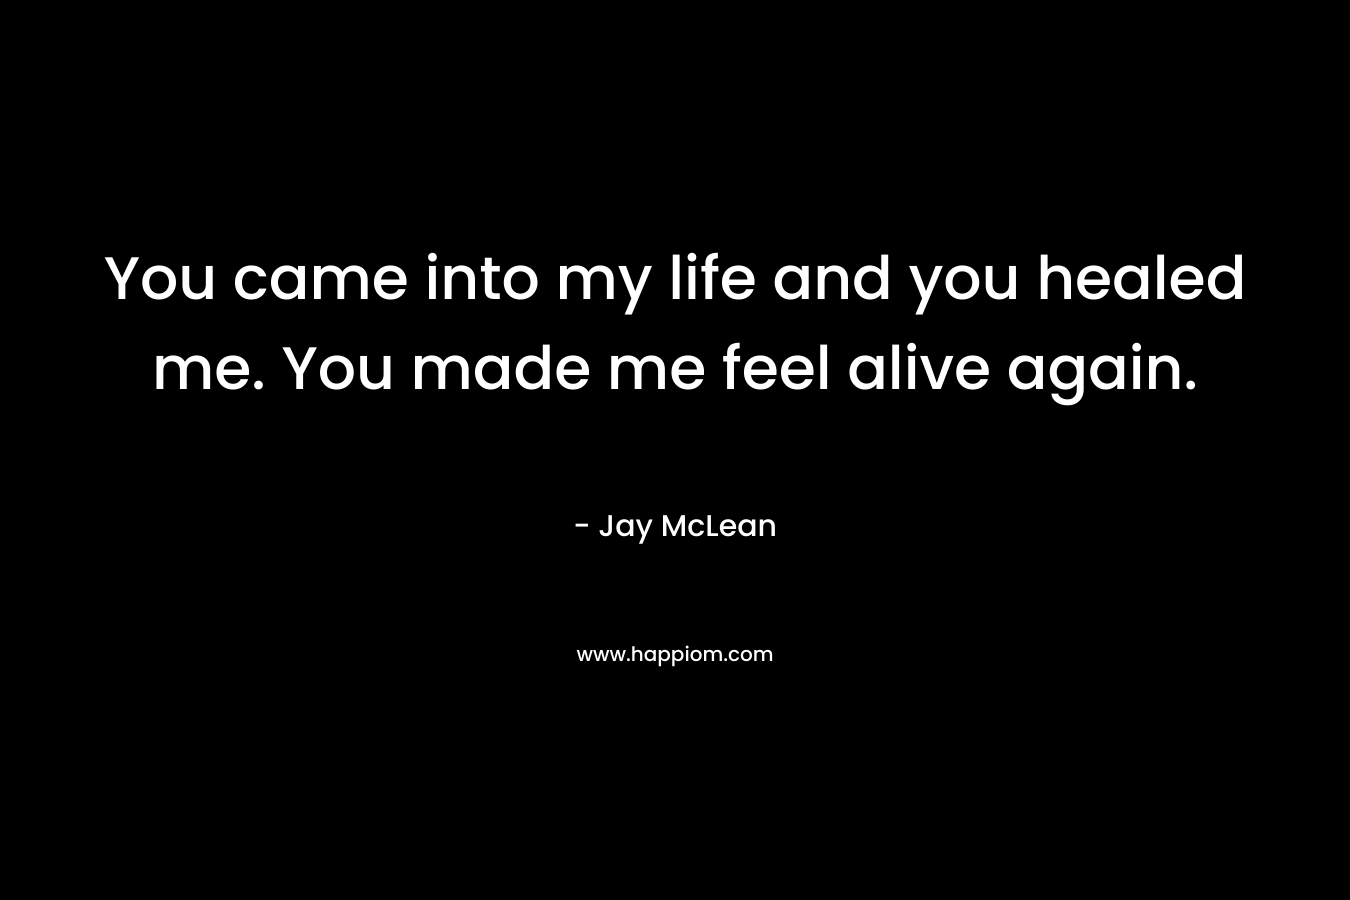 You came into my life and you healed me. You made me feel alive again. – Jay McLean